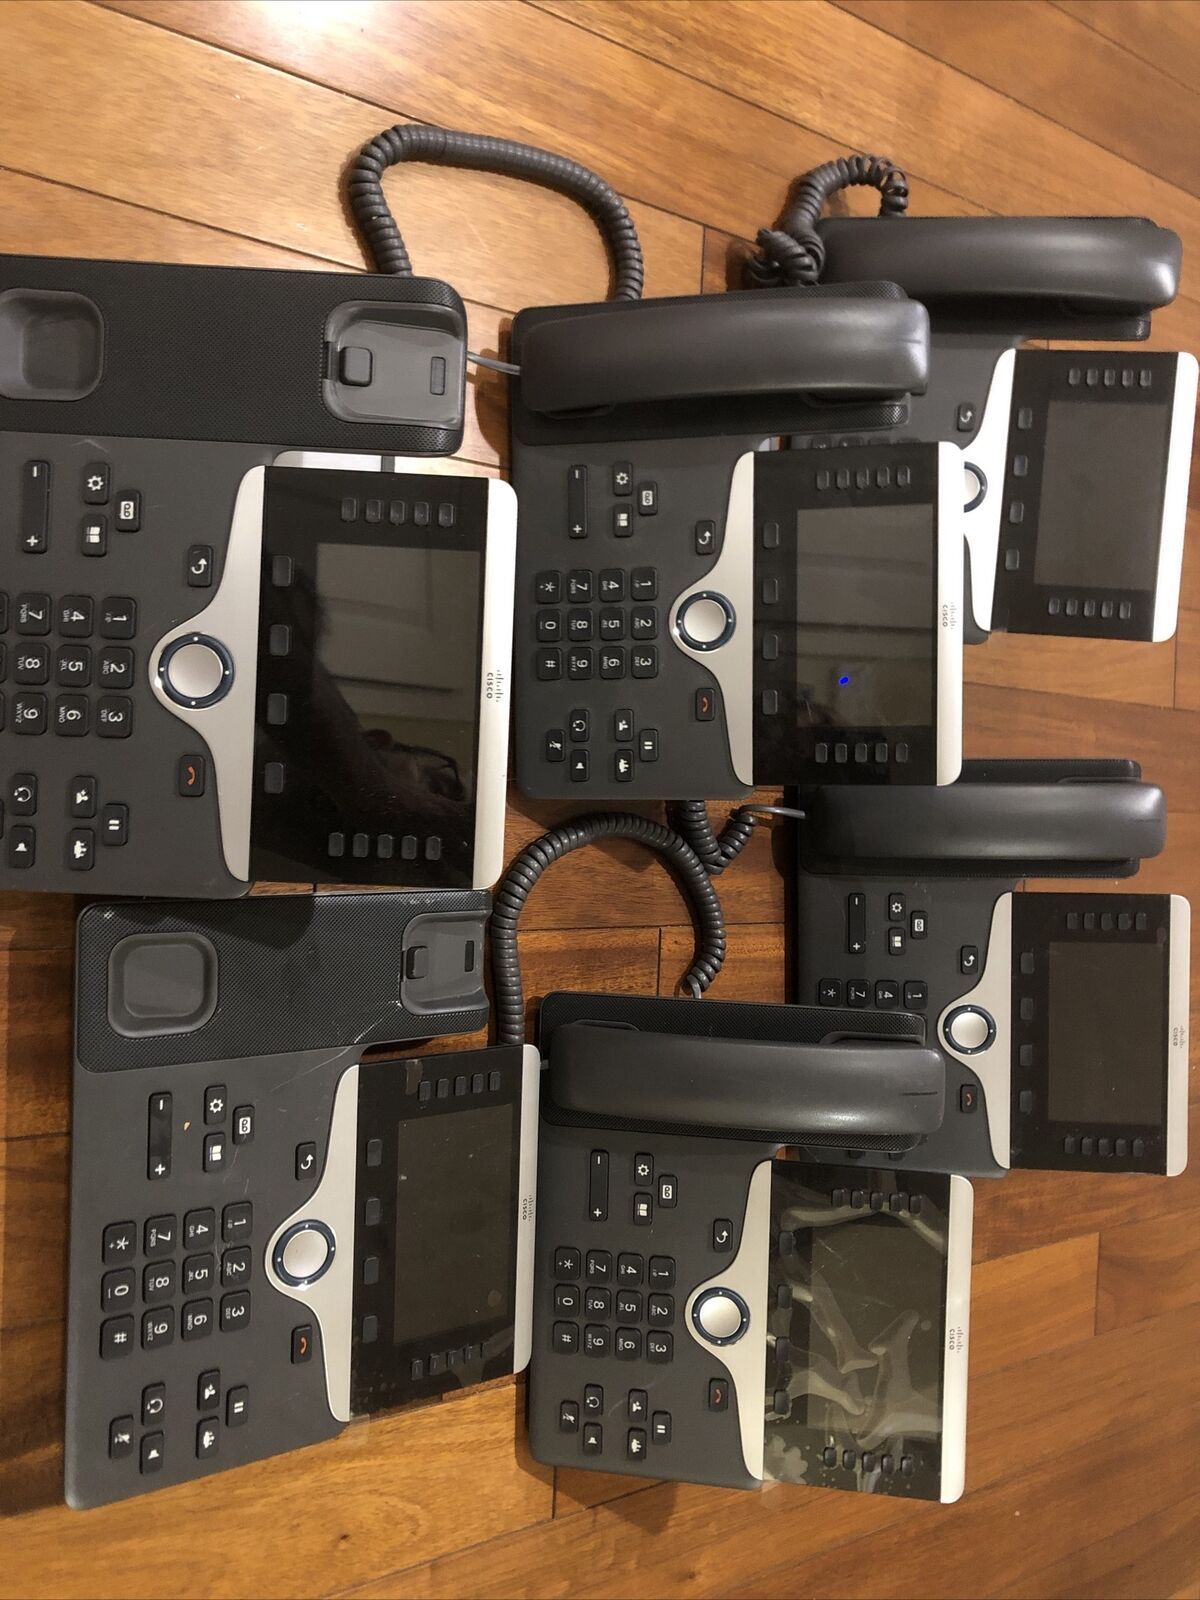 Lot/Bundle of (6) Cisco 8841 CP-8841-K9 VoIP IP Business Phone - Charcoal